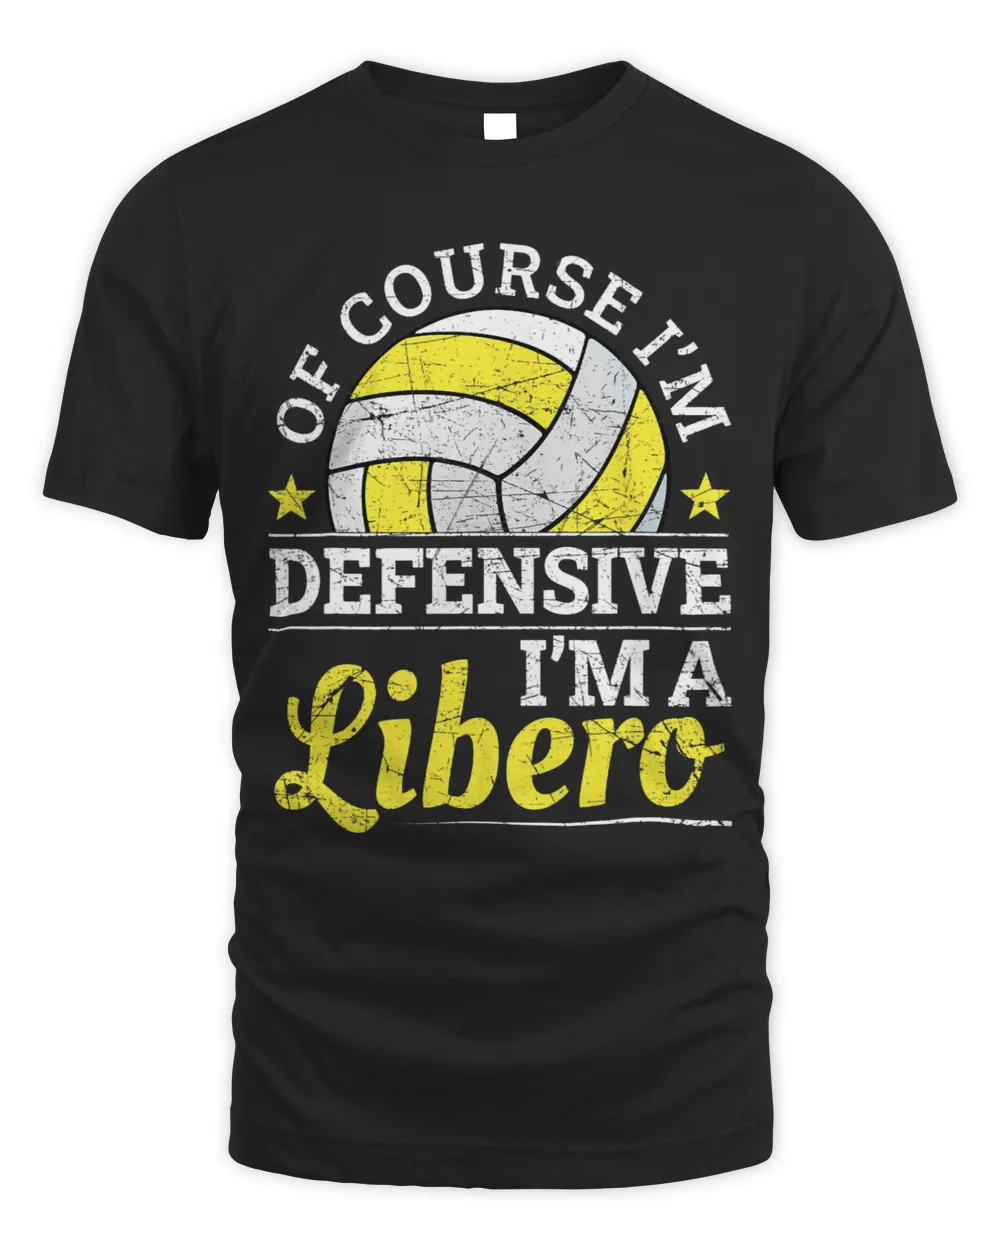 Volleyball Player Of Course Im Defensive Im A Libero